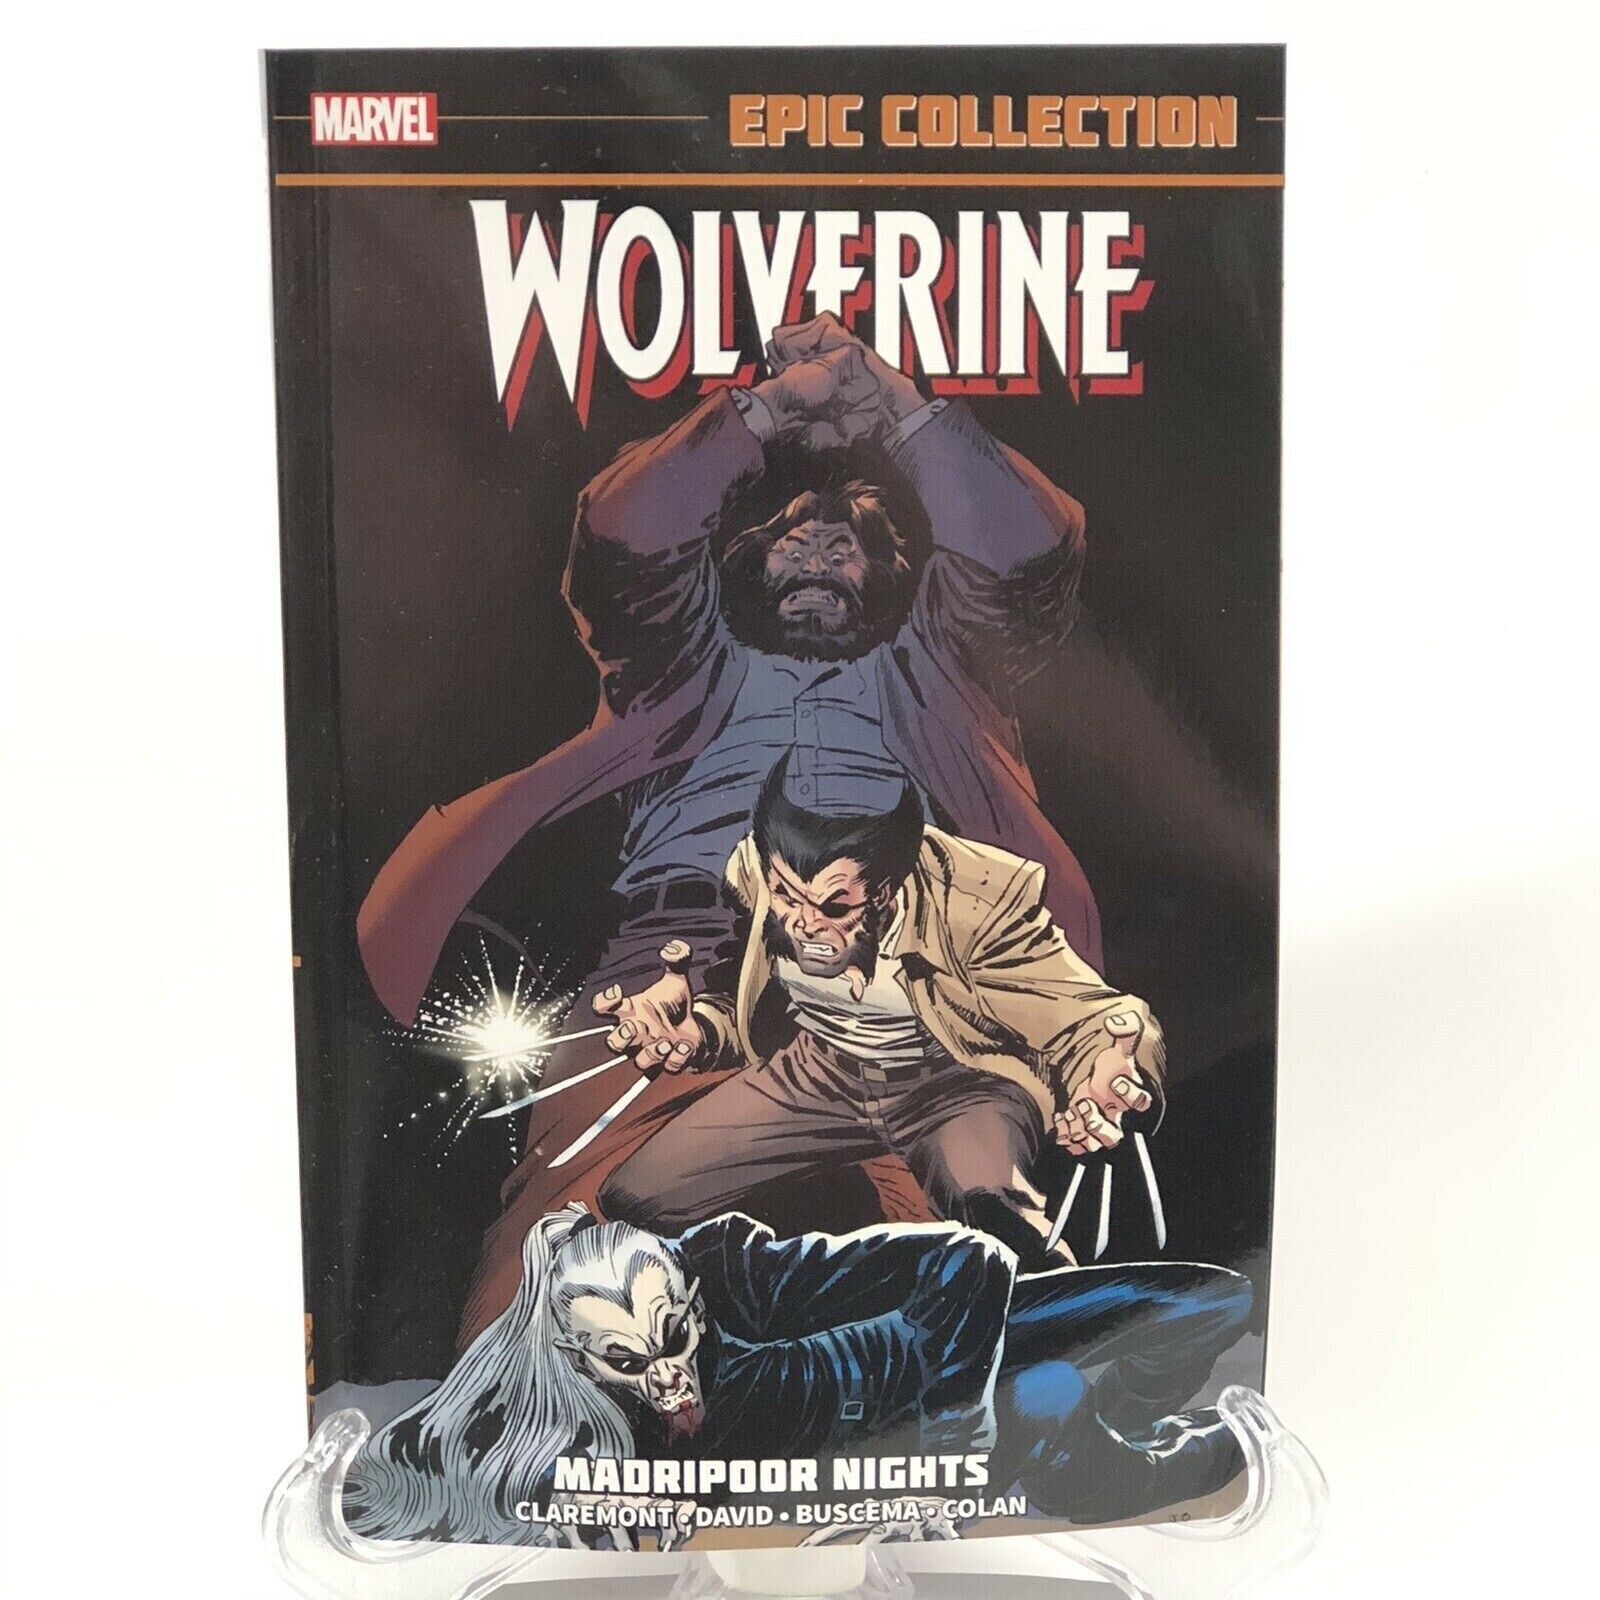 Wolverine Epic Collection Vol 1 Madripoor Nights New Marvel Comics TPB Paperback